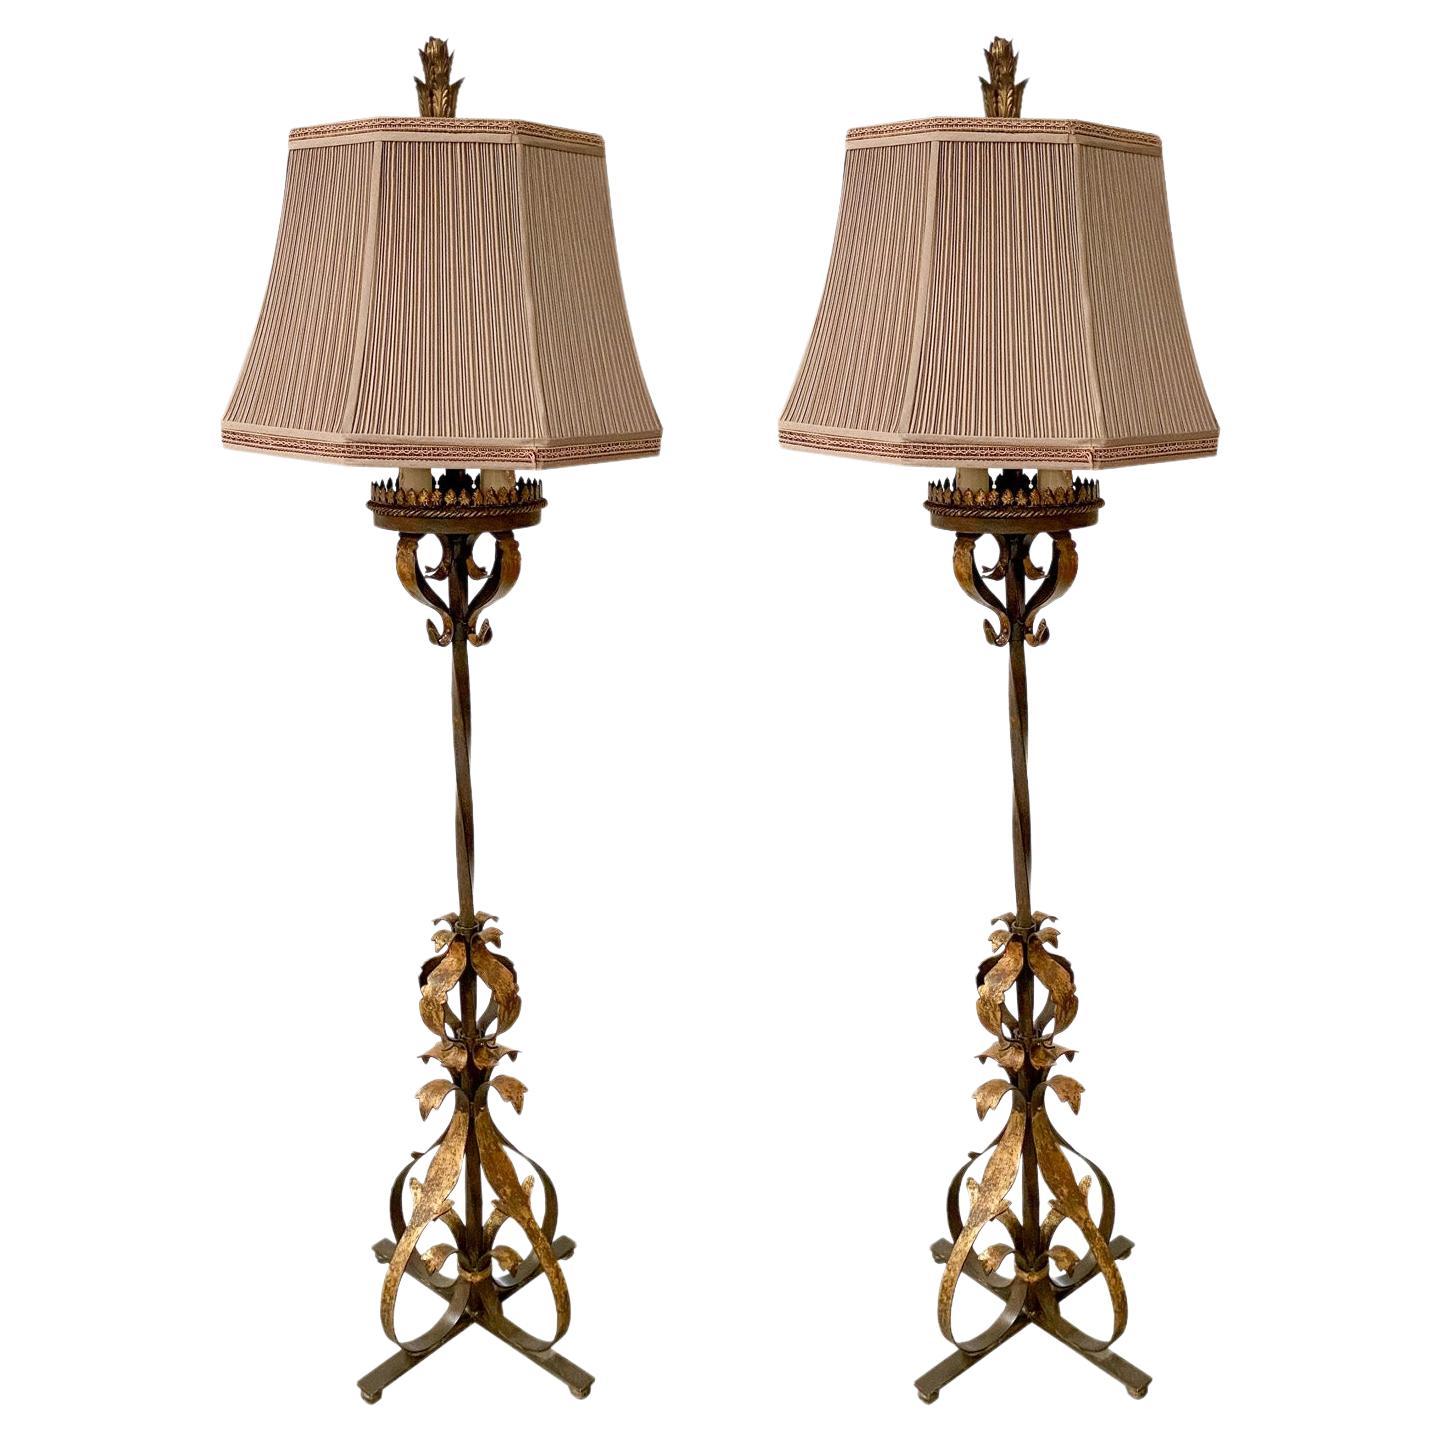 Spanish Baroque Style Wrought Iron Floor Lamp by Fine Art Lighting, a Pair 